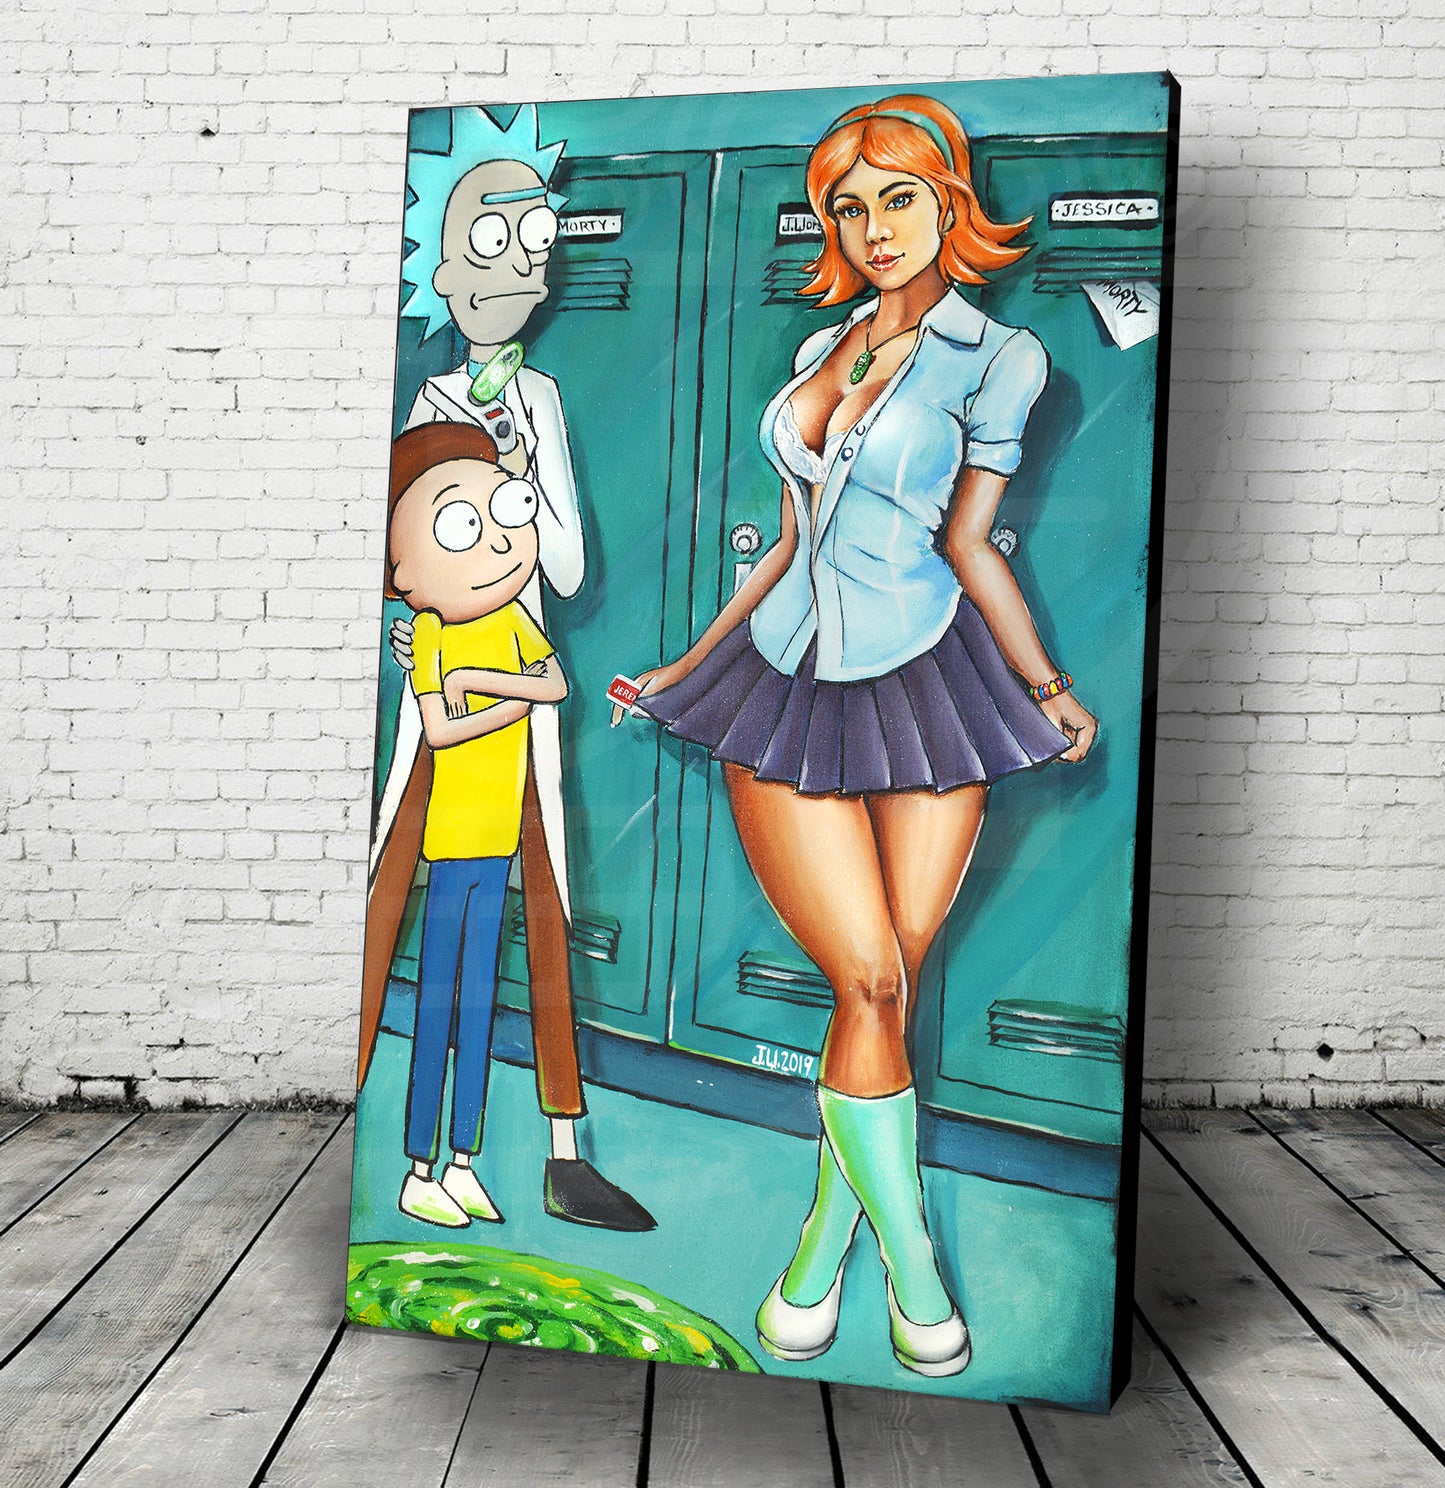 Jessica Rick and Morty by Jeremy Worst